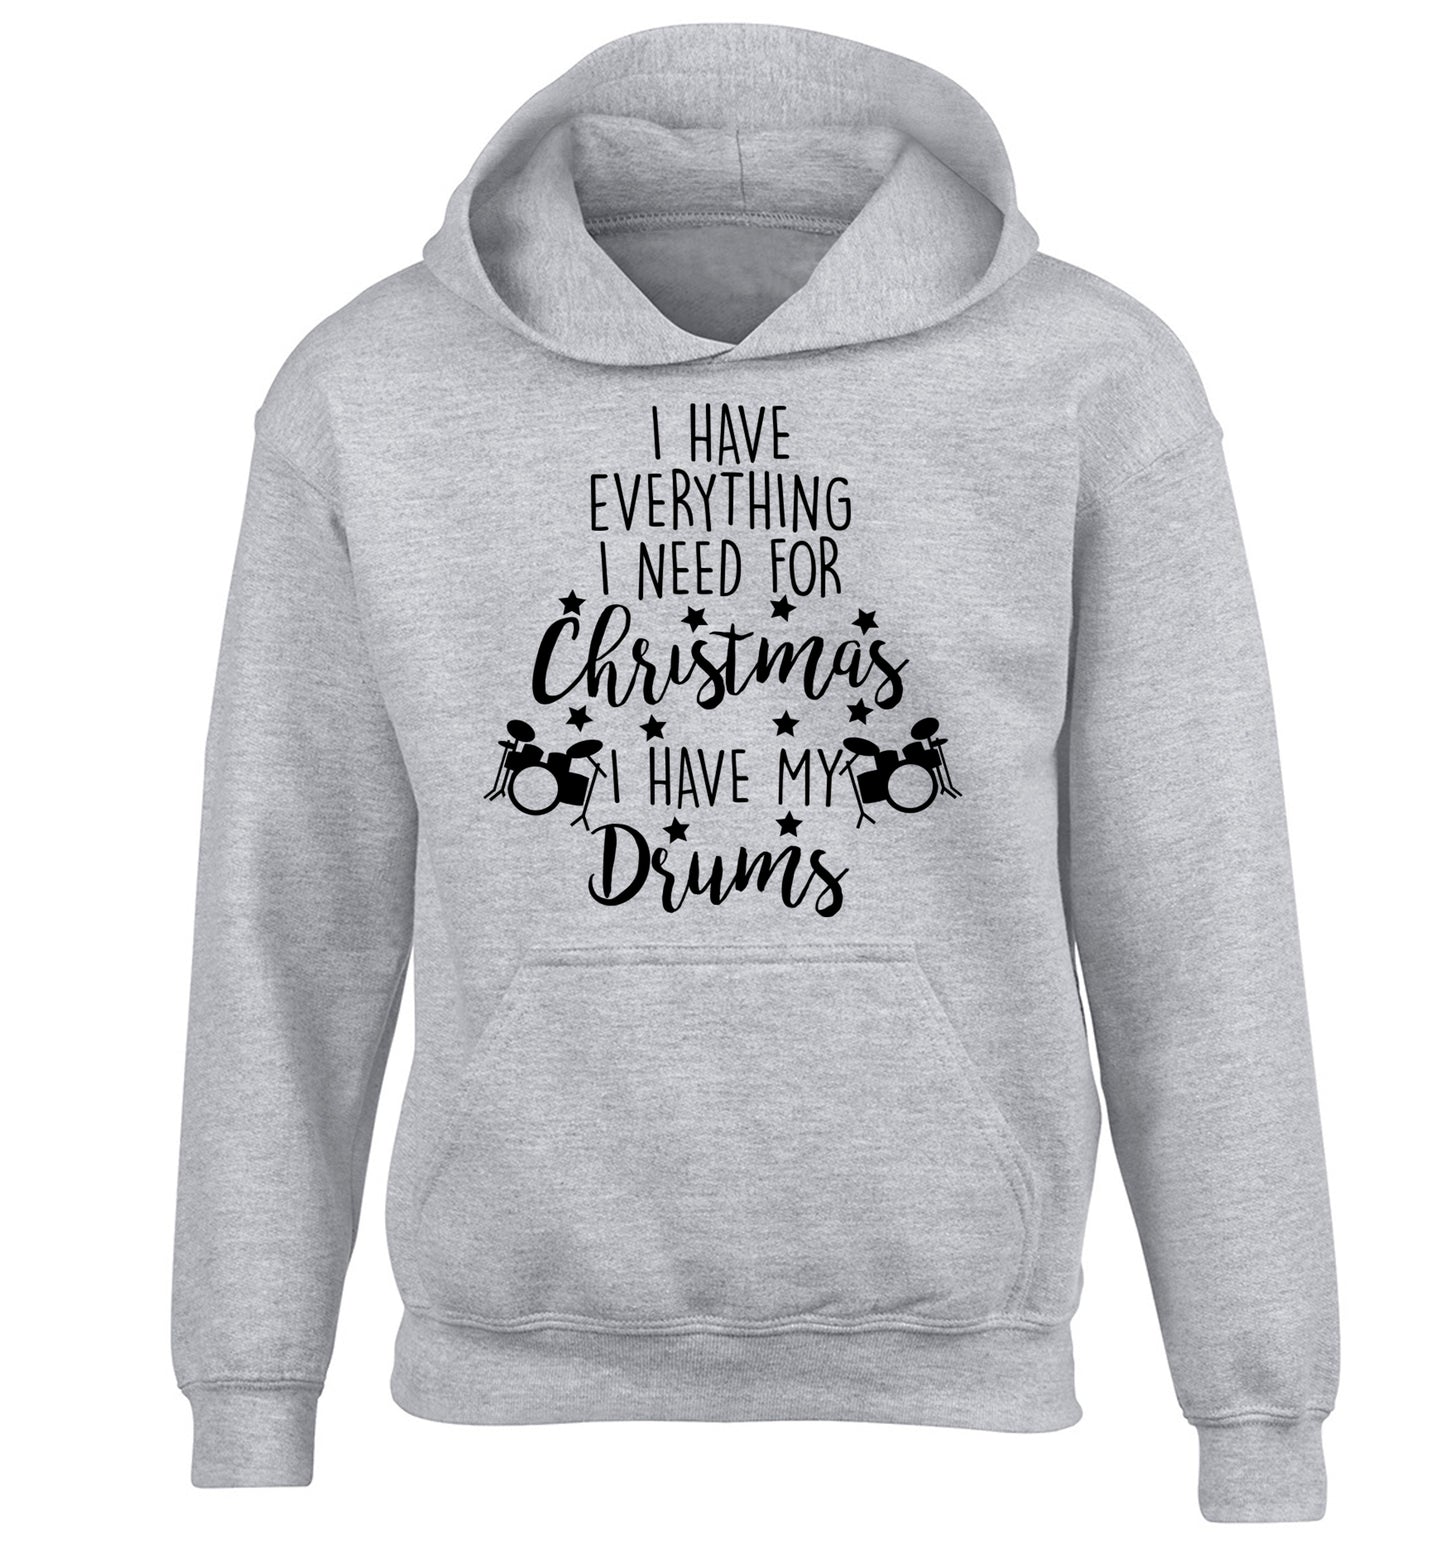 I have everything I need for Christmas I have my drums! children's grey hoodie 12-14 Years